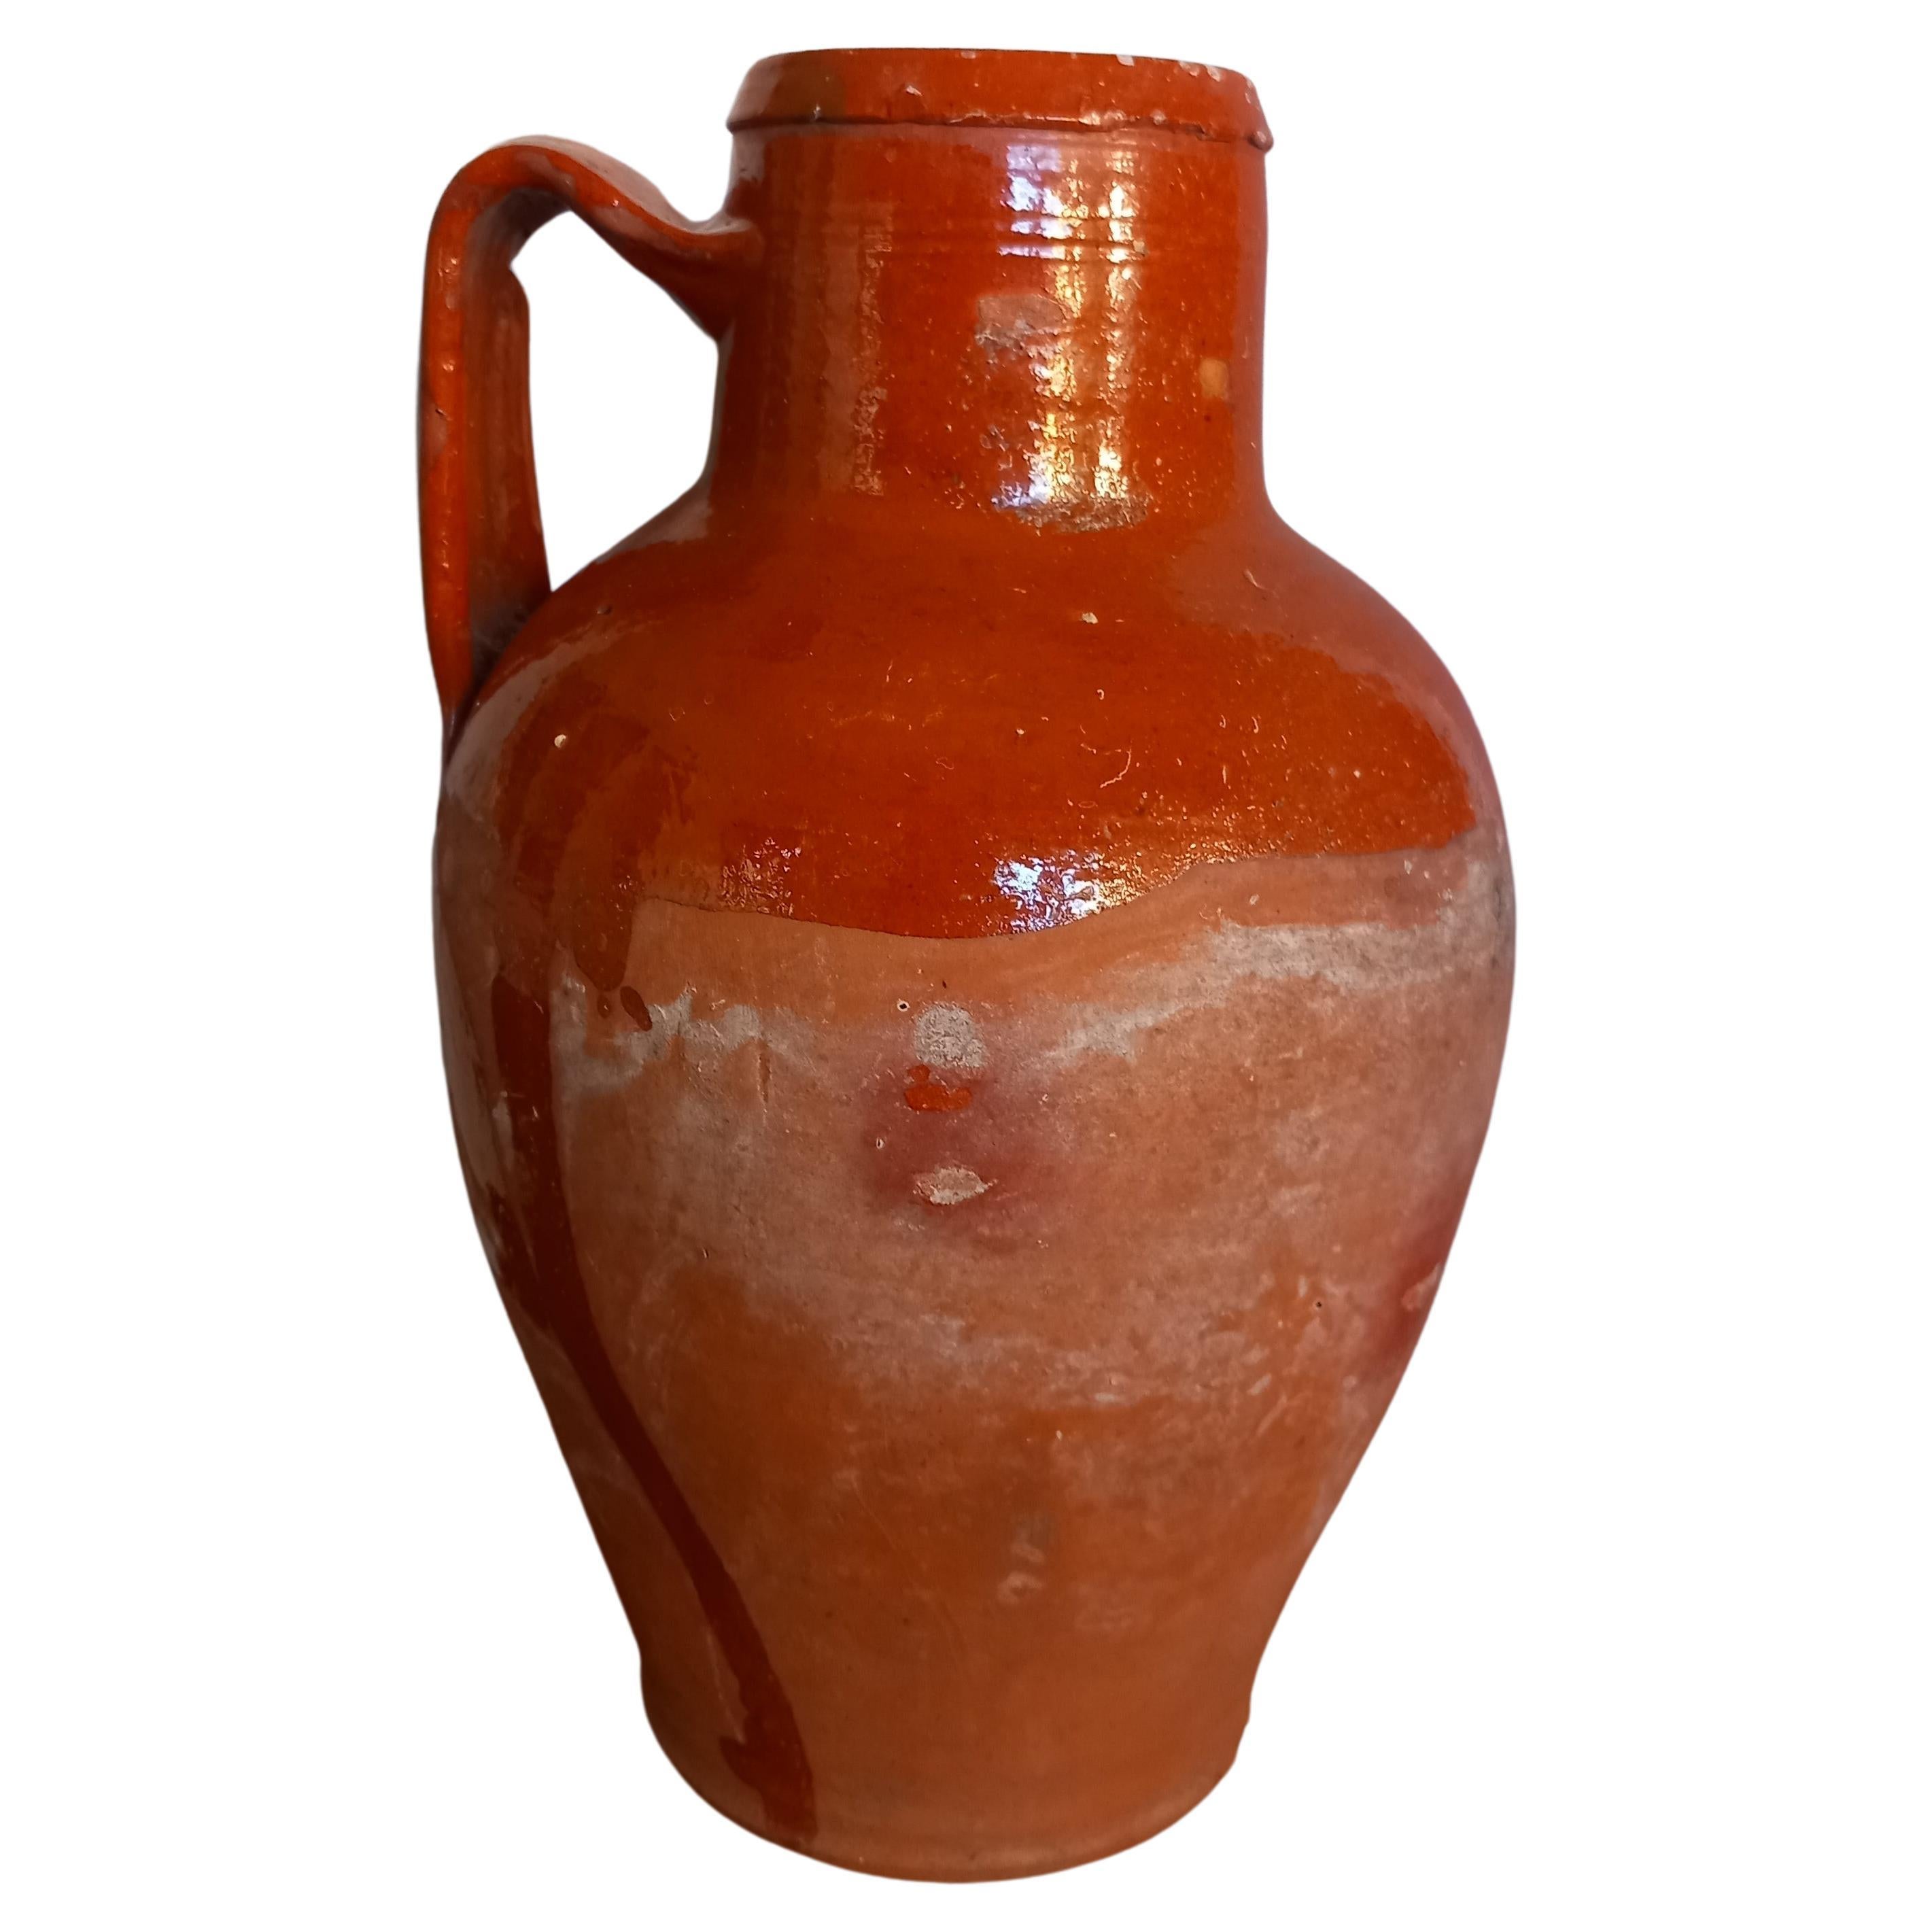 Typical Spanish kitchen Container Fired Red Clay Ceramic  Early 20th Century